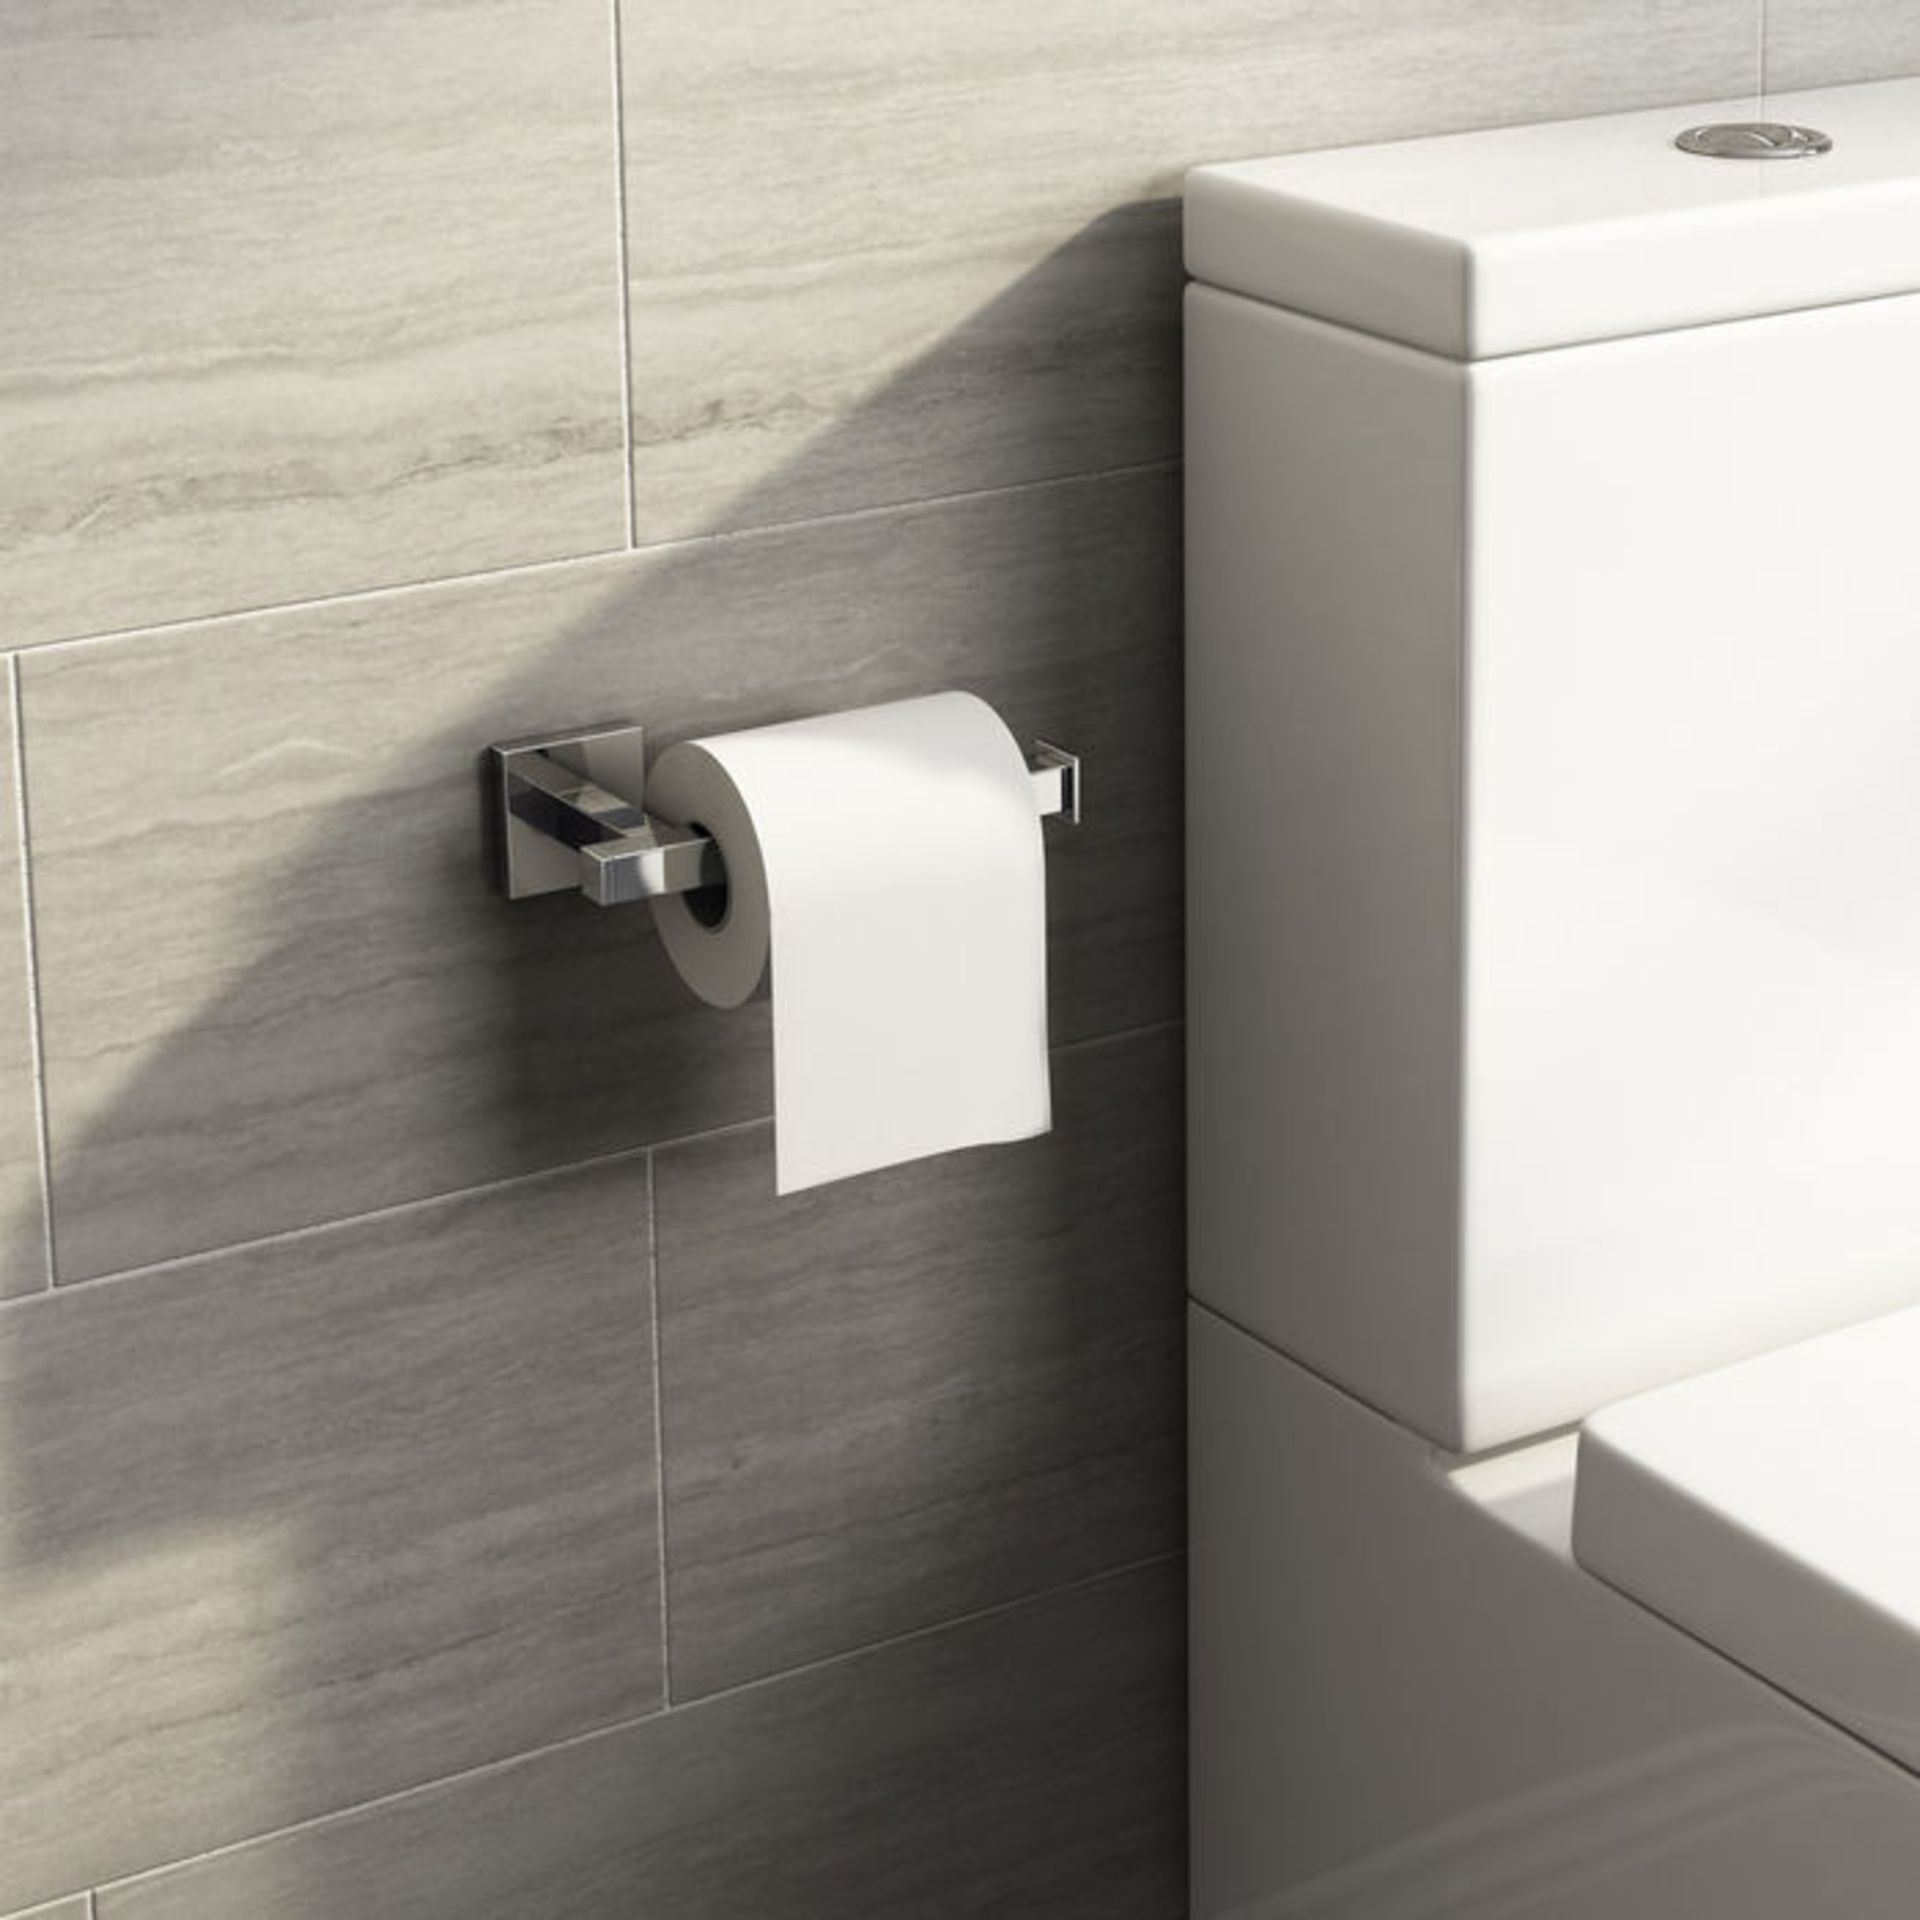 (TA39) Jesmond Toilet Roll Holder Finishes your bathroom with a little extra functionality and style - Image 3 of 3